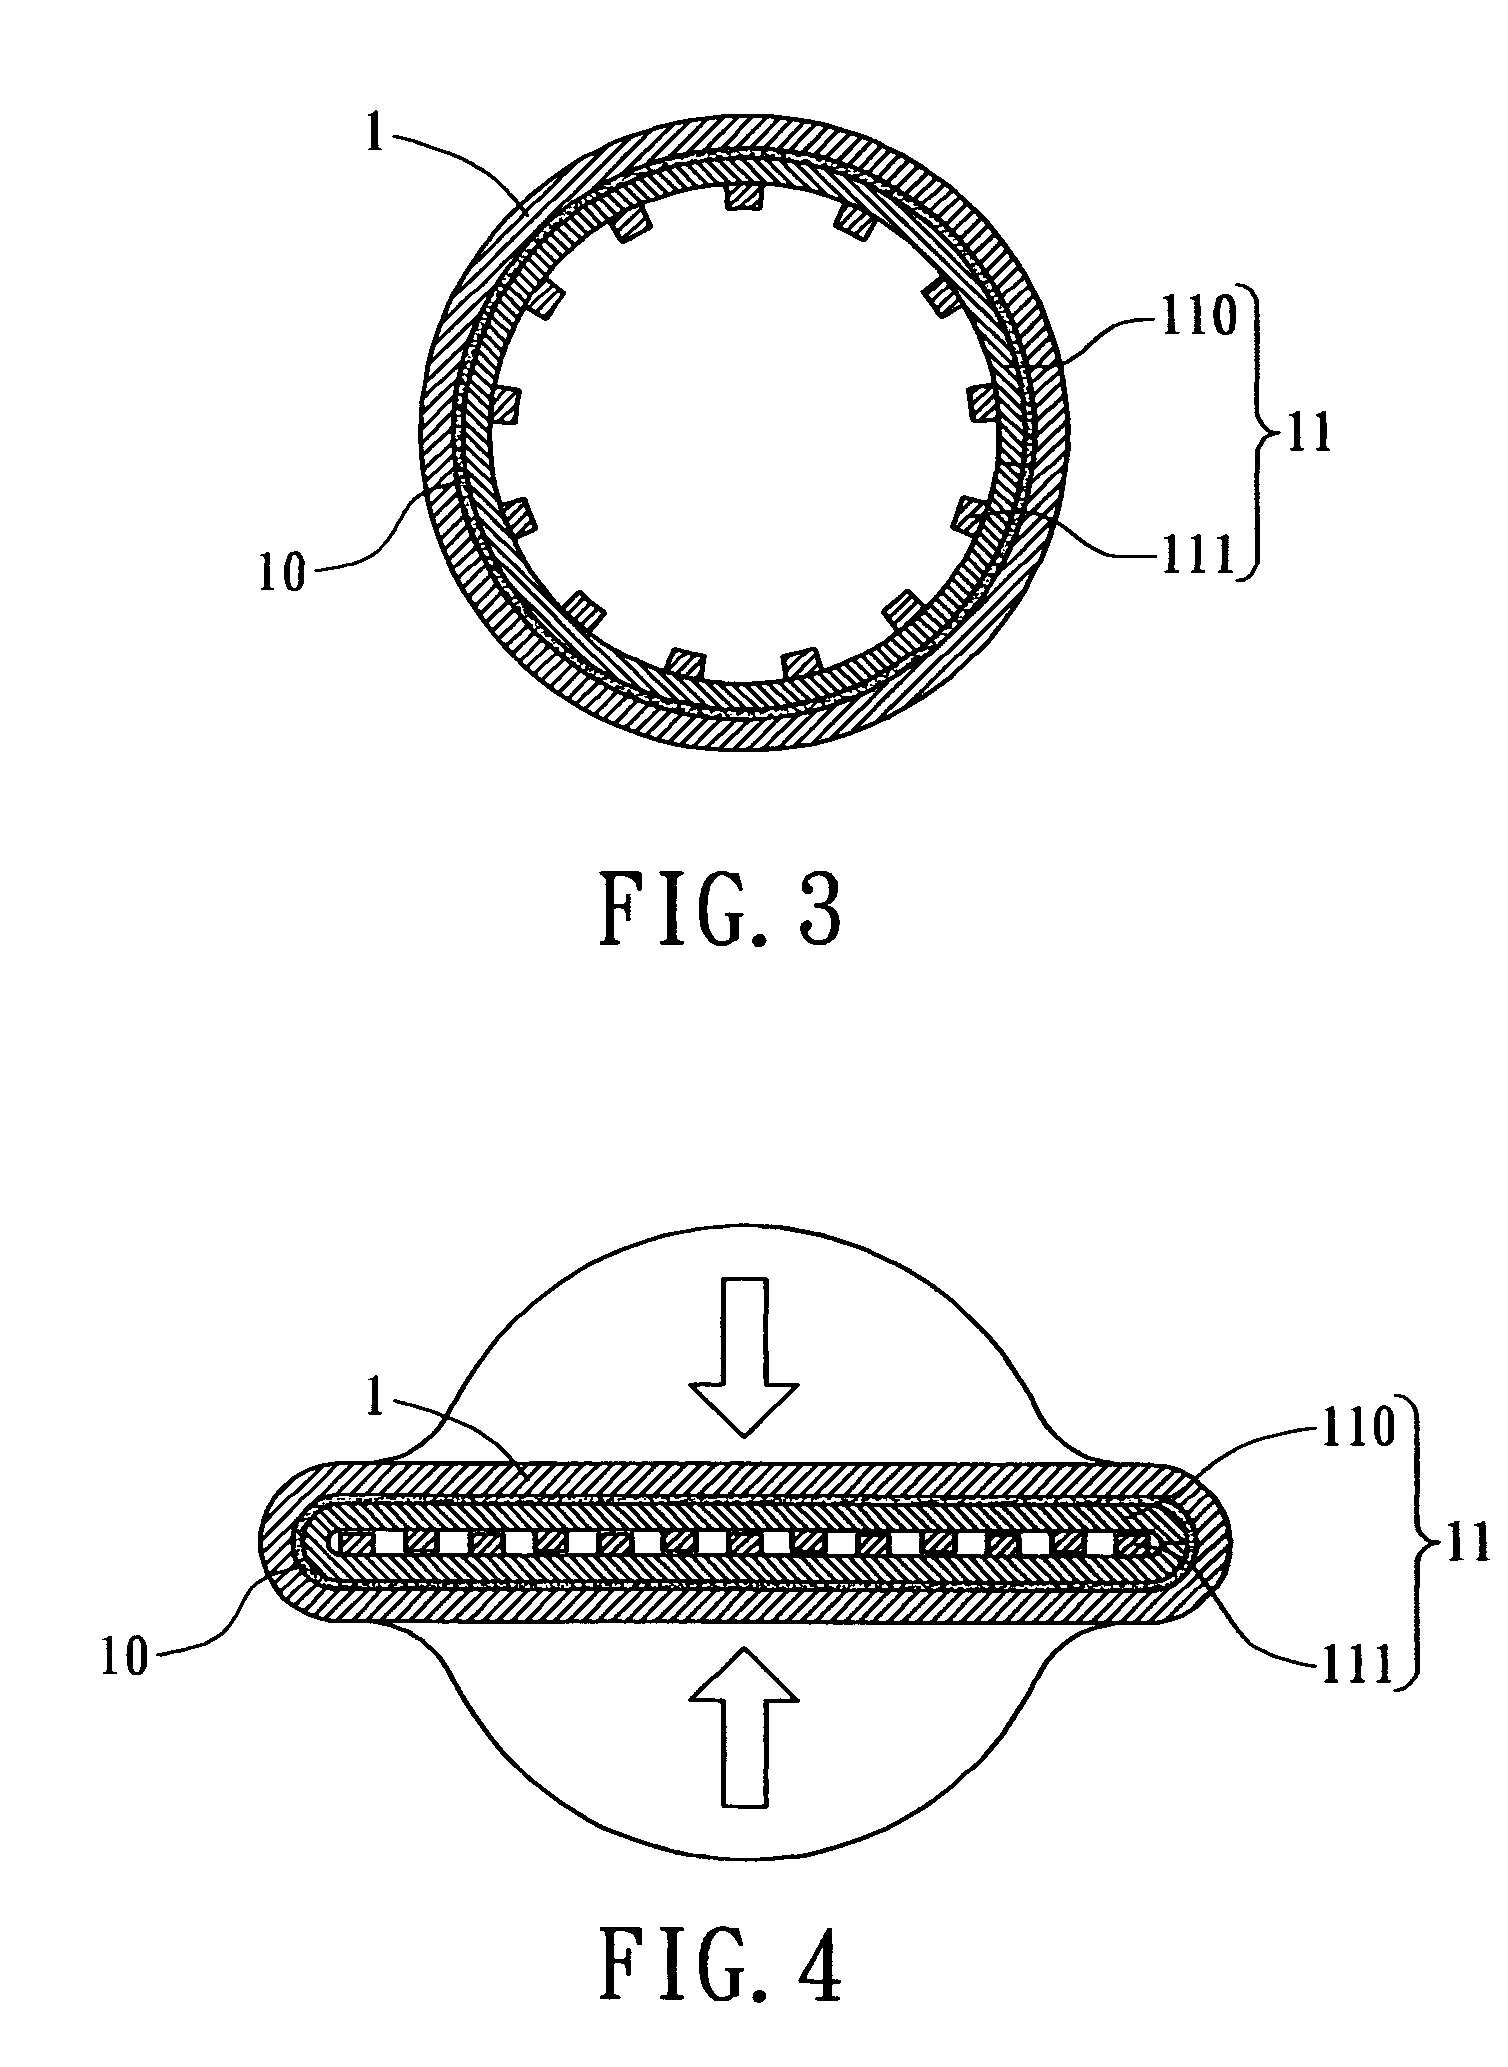 Heat pipe assembly